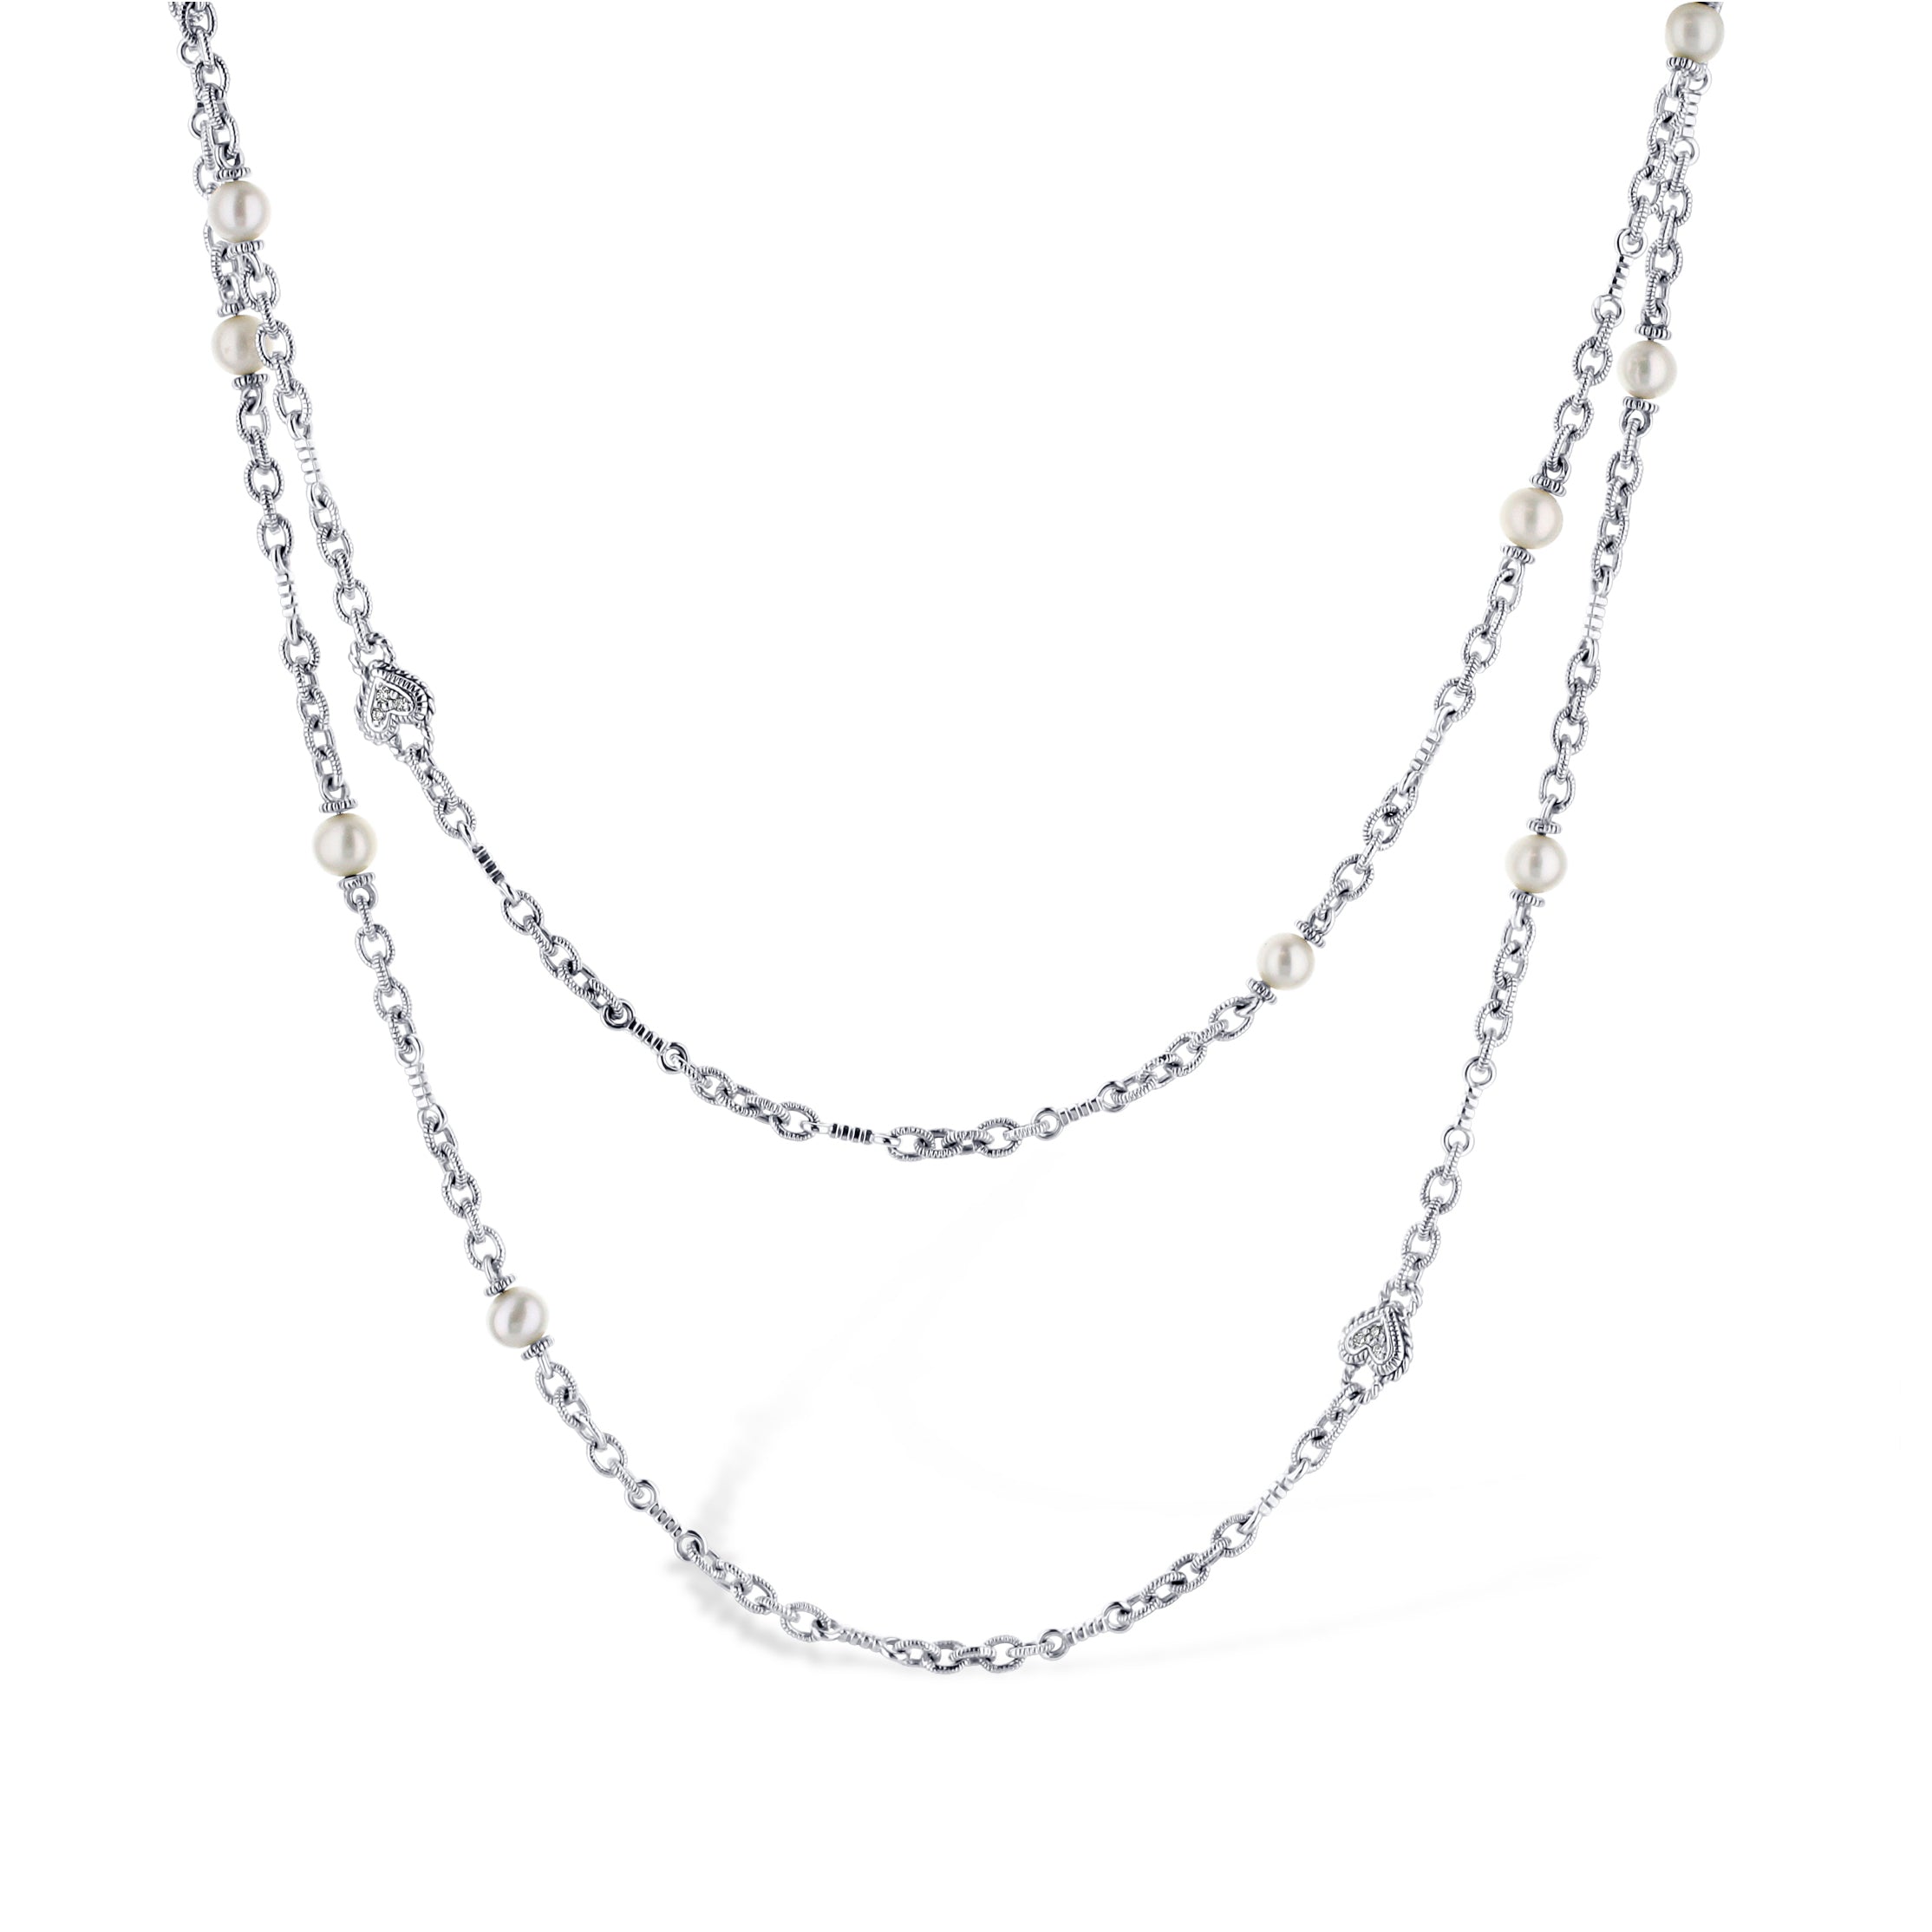 Judith Ripka White Gold Cultured Pearls By The Yard Necklace With Diamonds